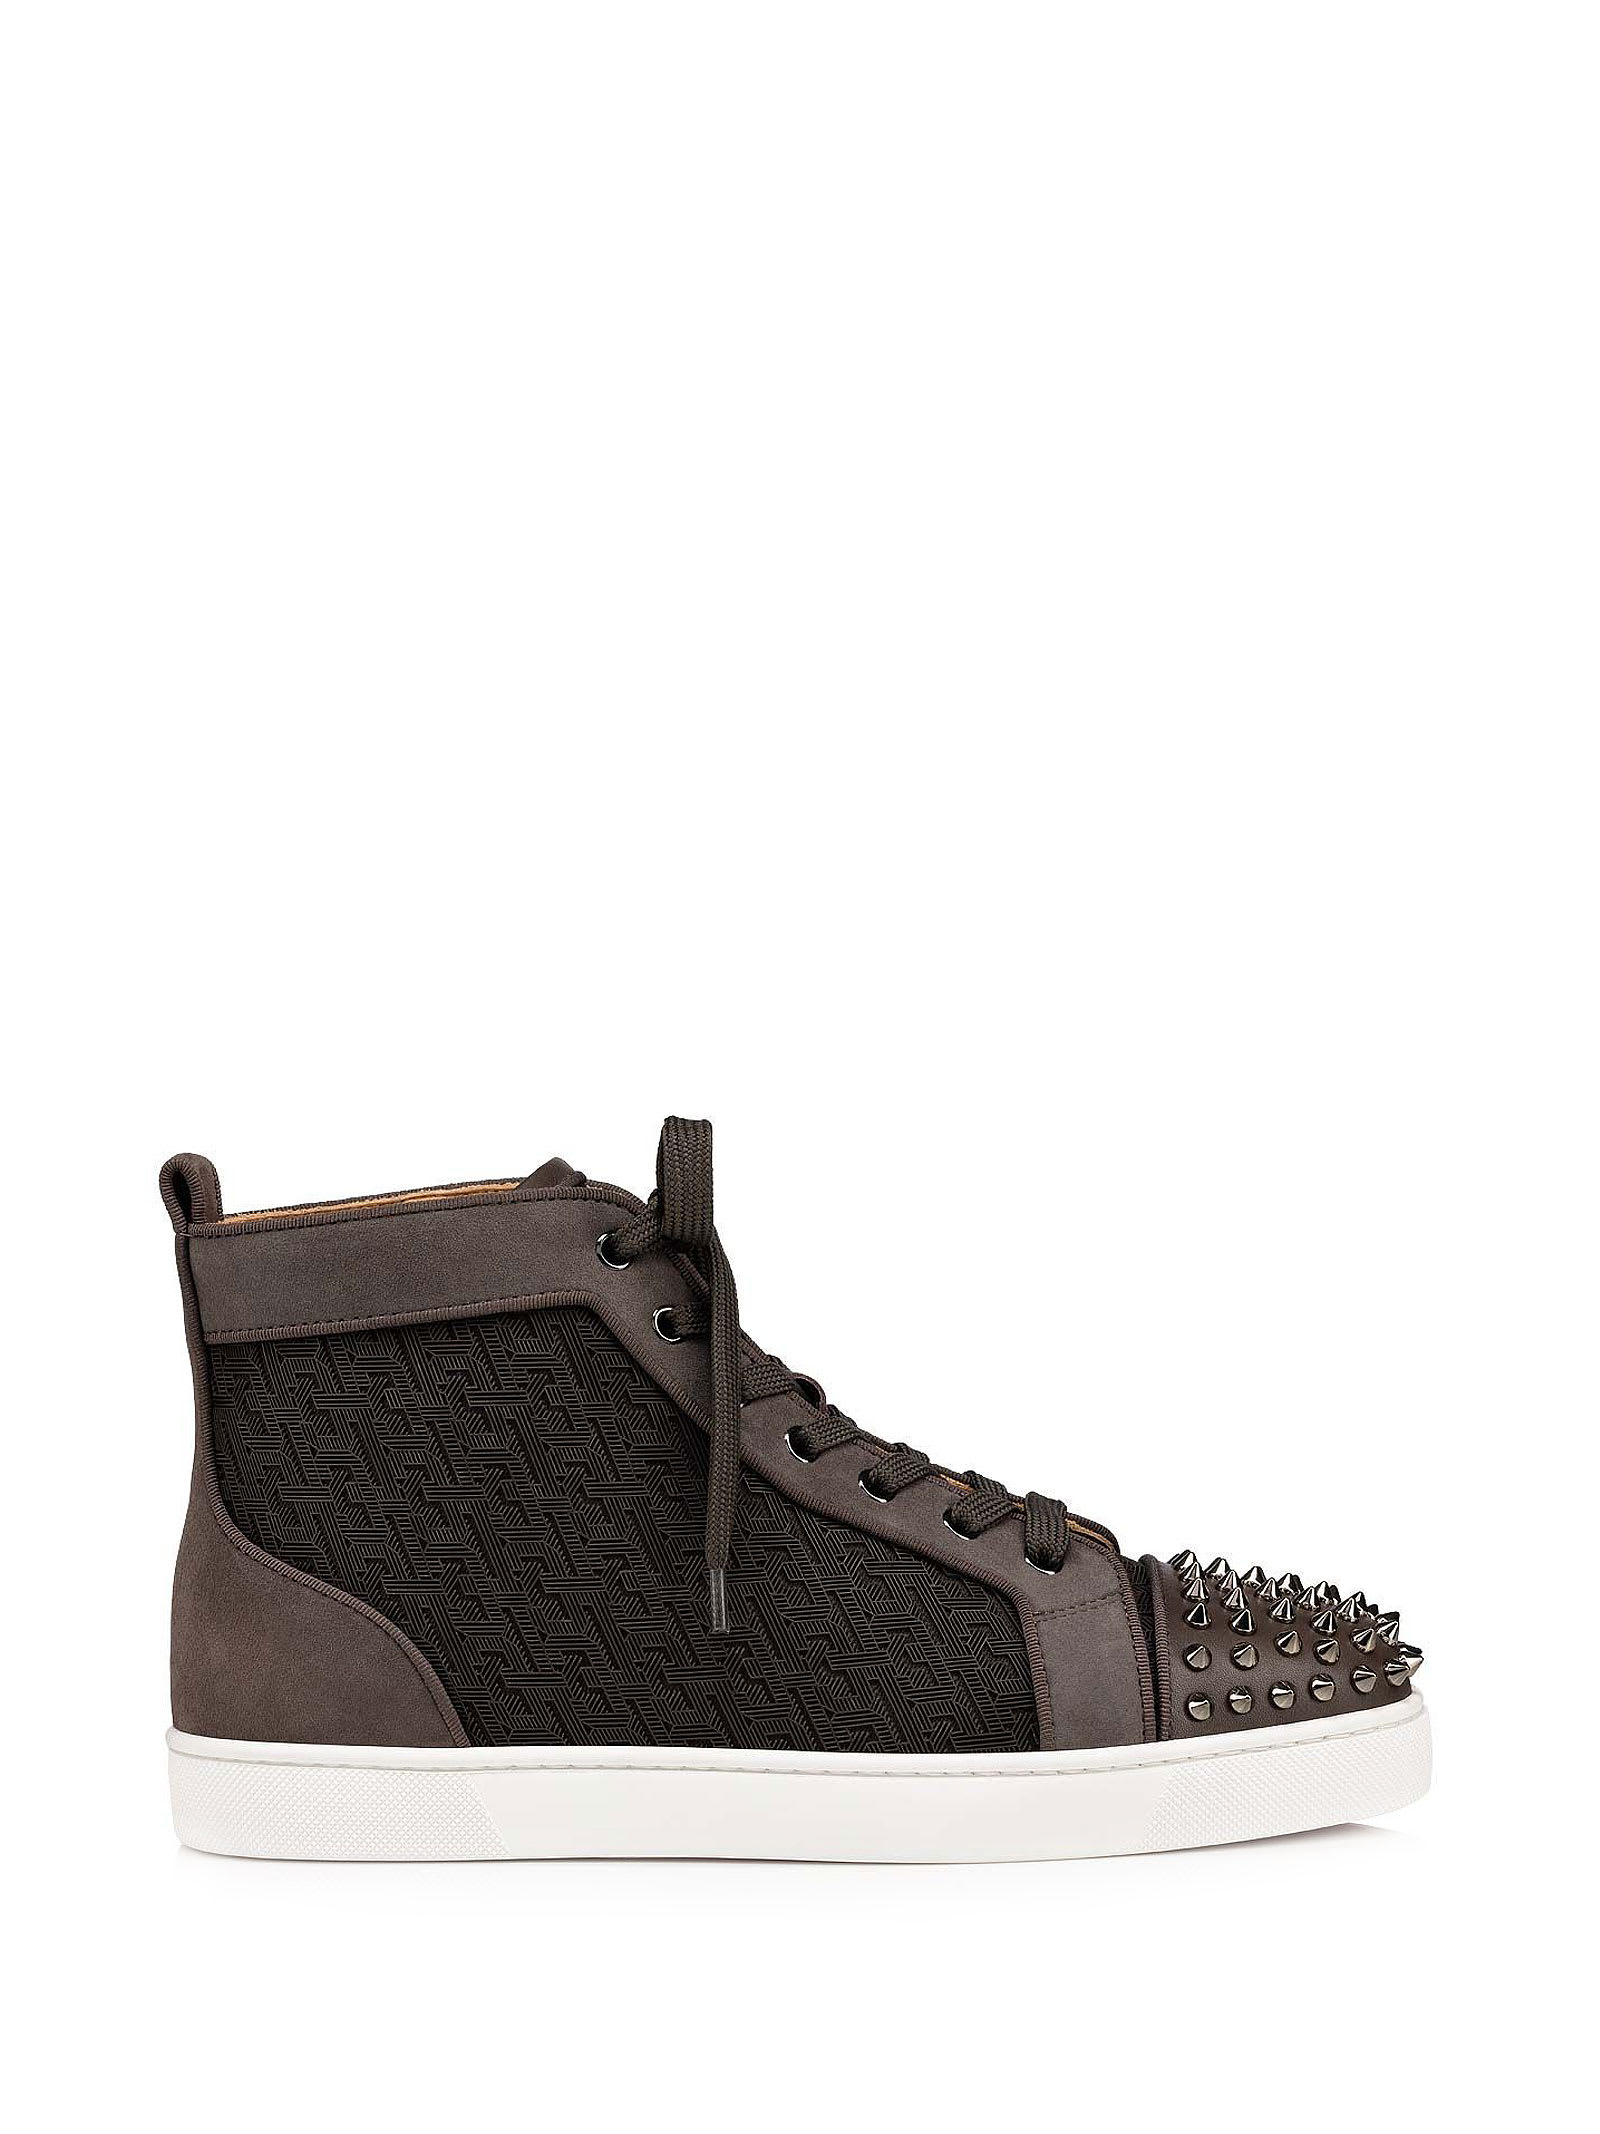 Christian Louboutin Lou Sneakers In Ombre |